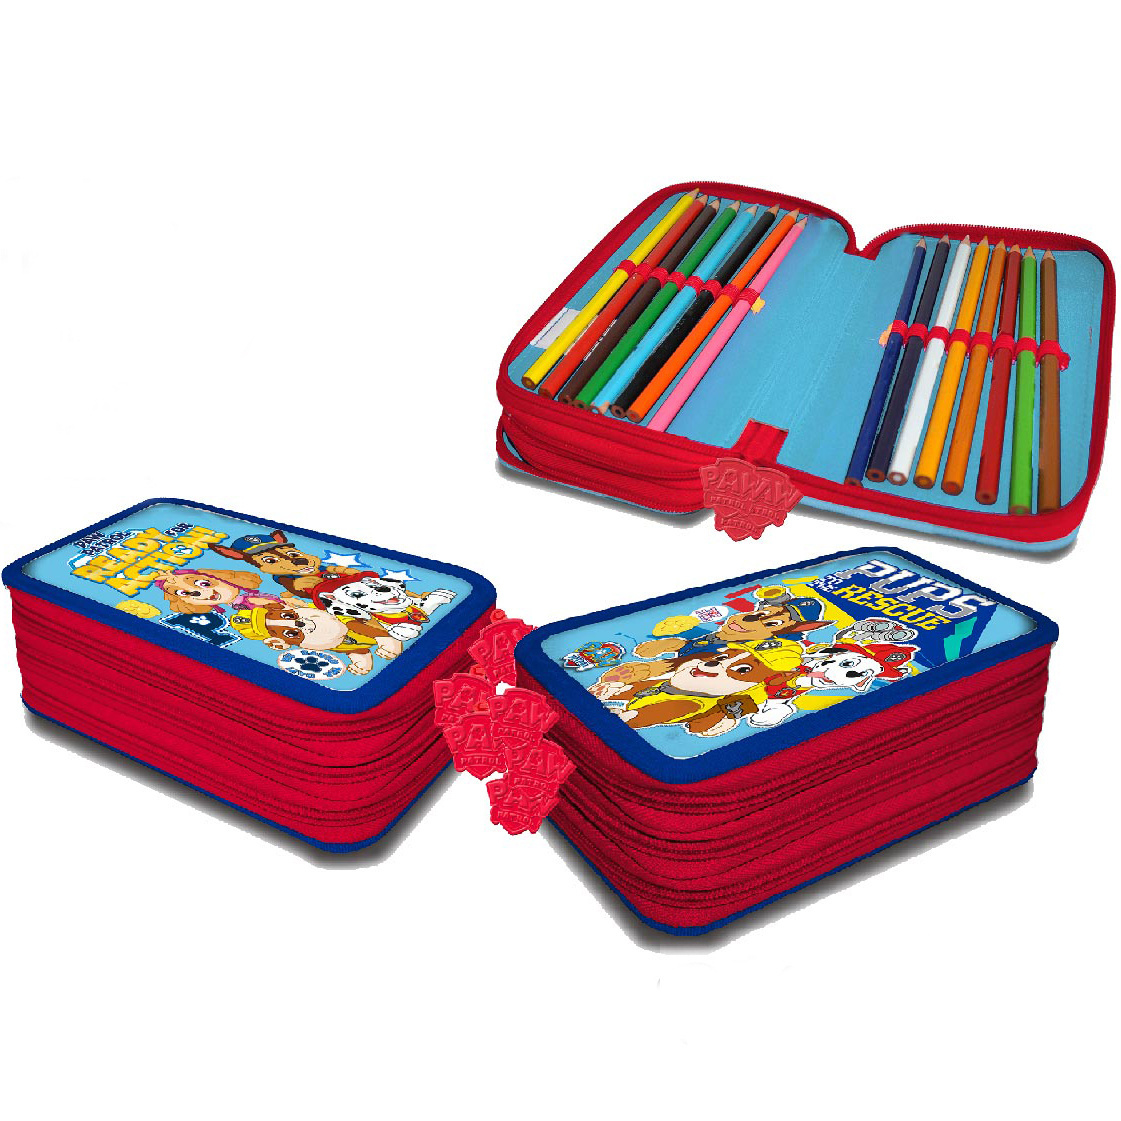 Paw Patrol Filled pouch To the Rescue - 39 pieces - 11.5 x 19.5 x 6.5 cm - Polyester